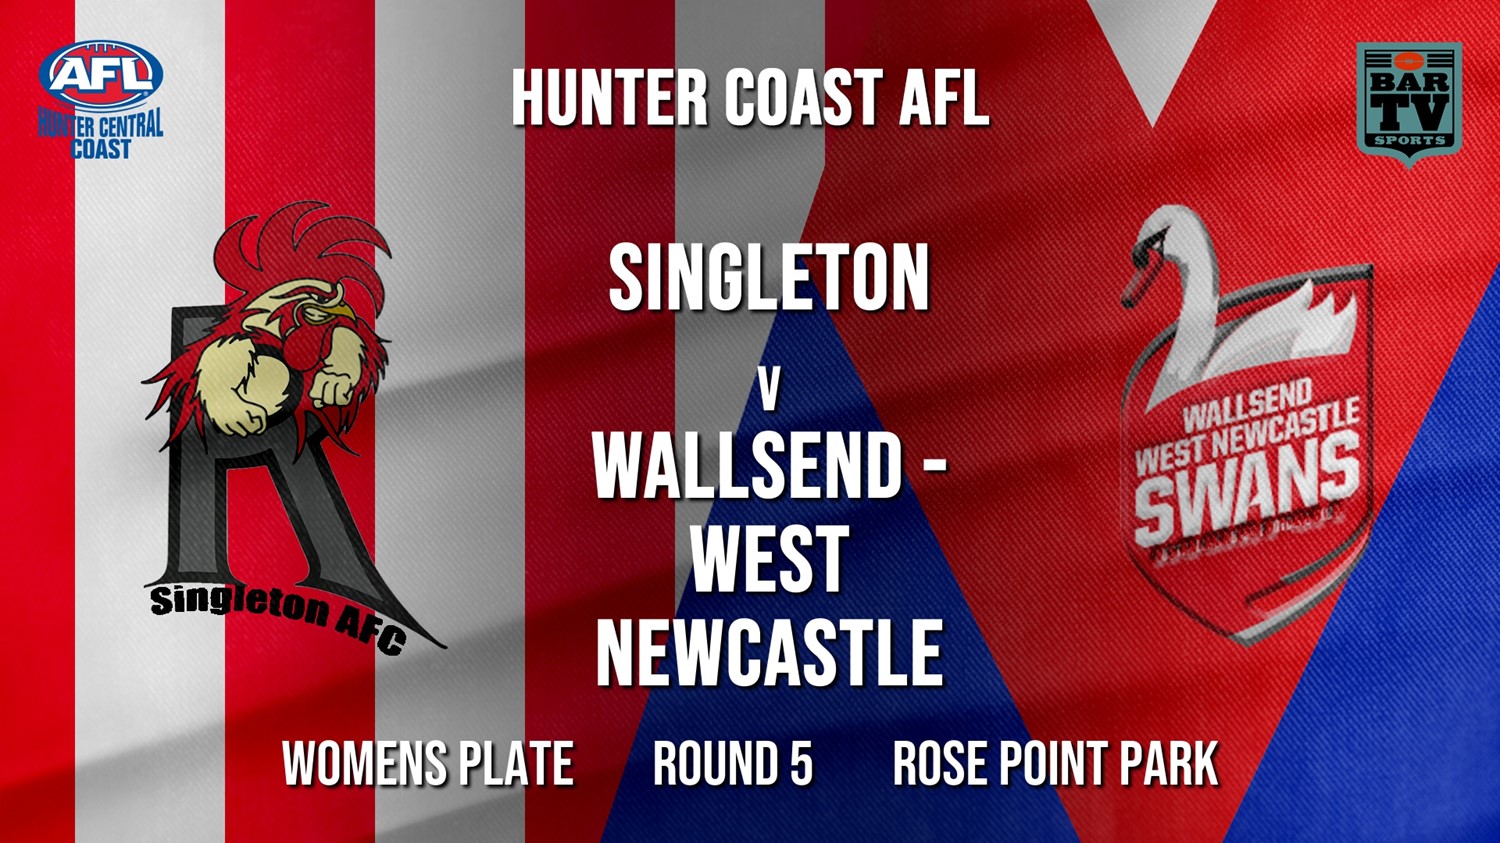 AFL HCC Round 5 - Women's Plate - Singleton Roosters v Wallsend - West Newcastle  (1) Minigame Slate Image